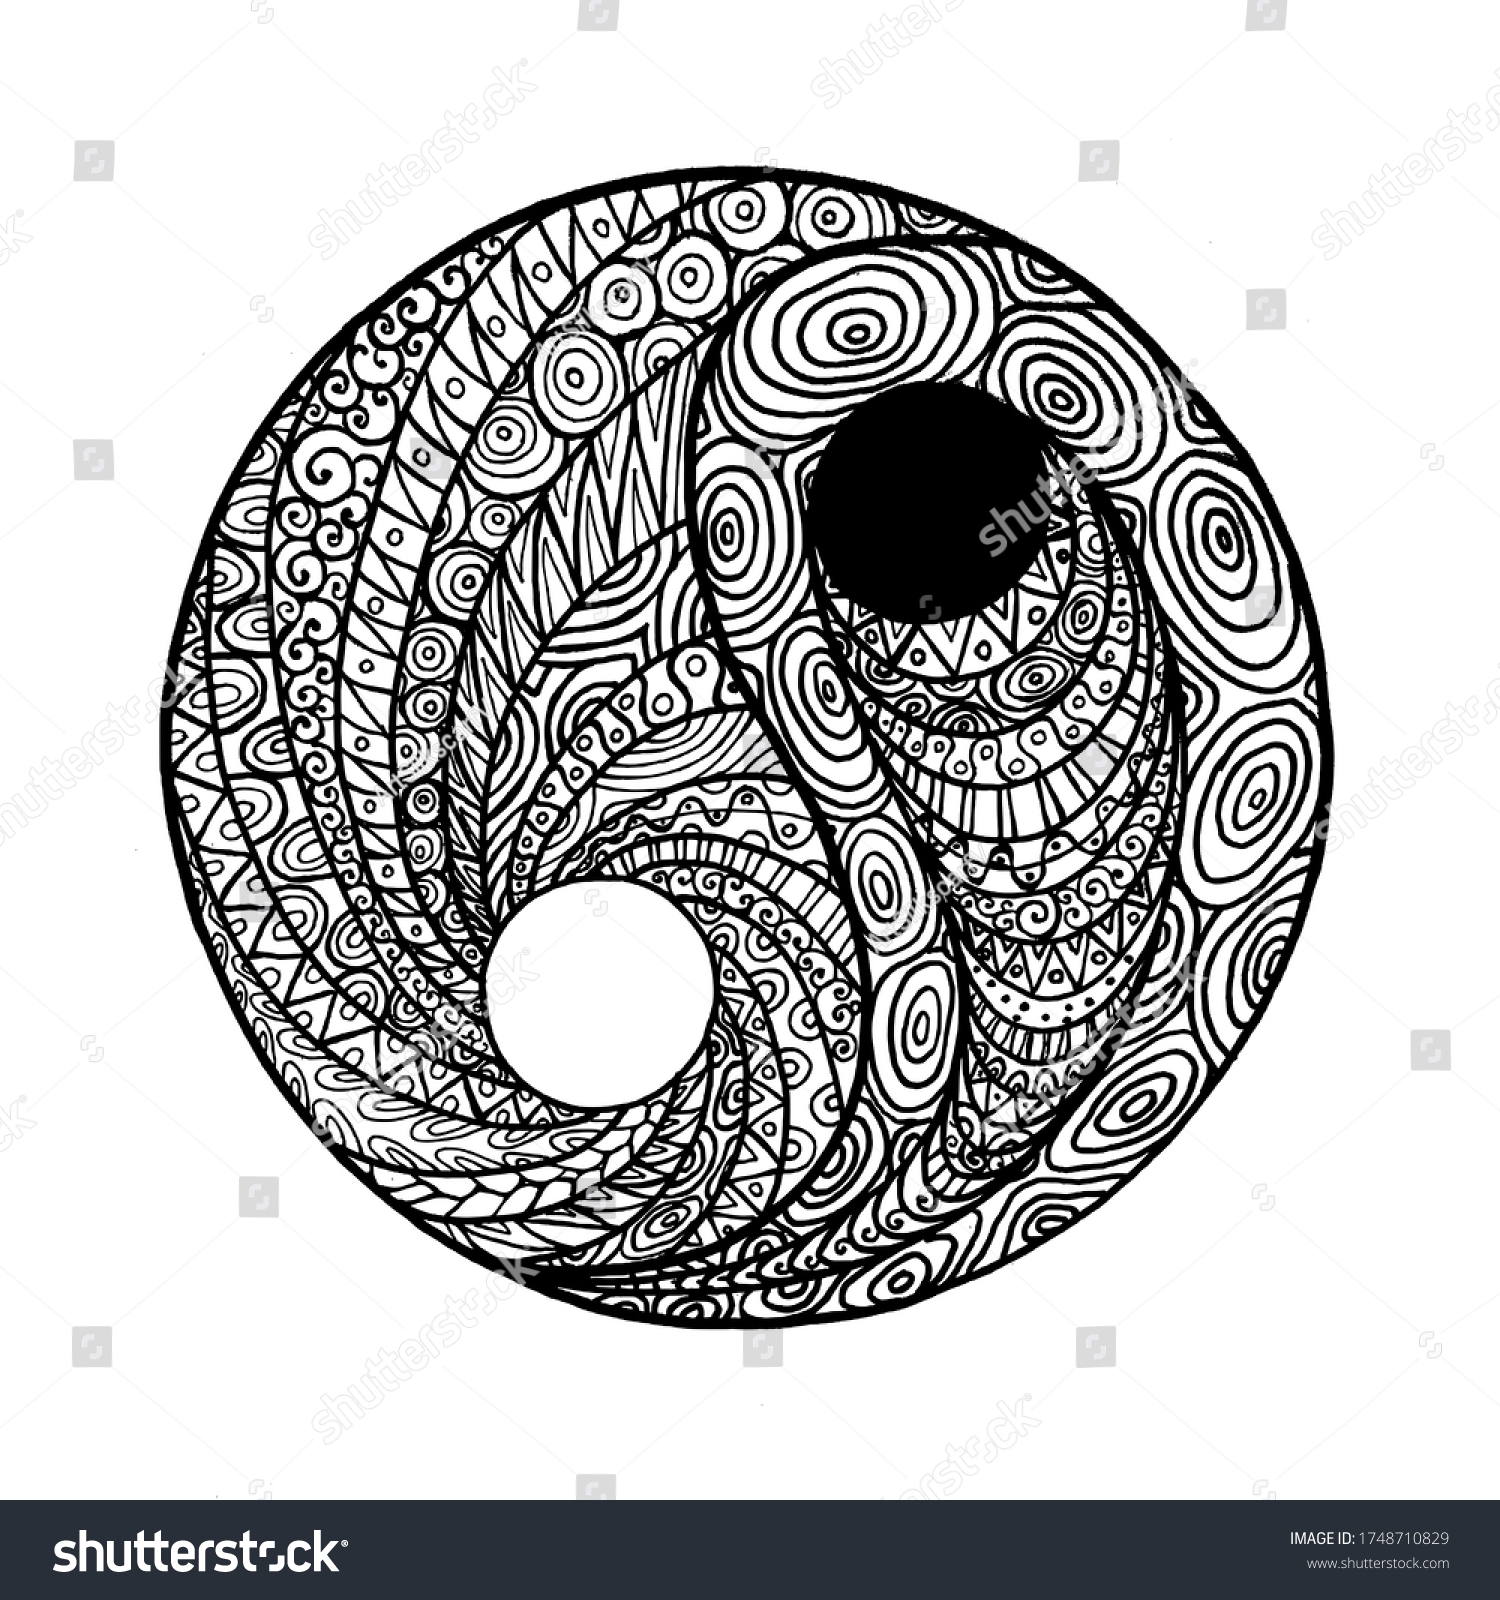 Yin yang coloring book picture coloring stock illustration